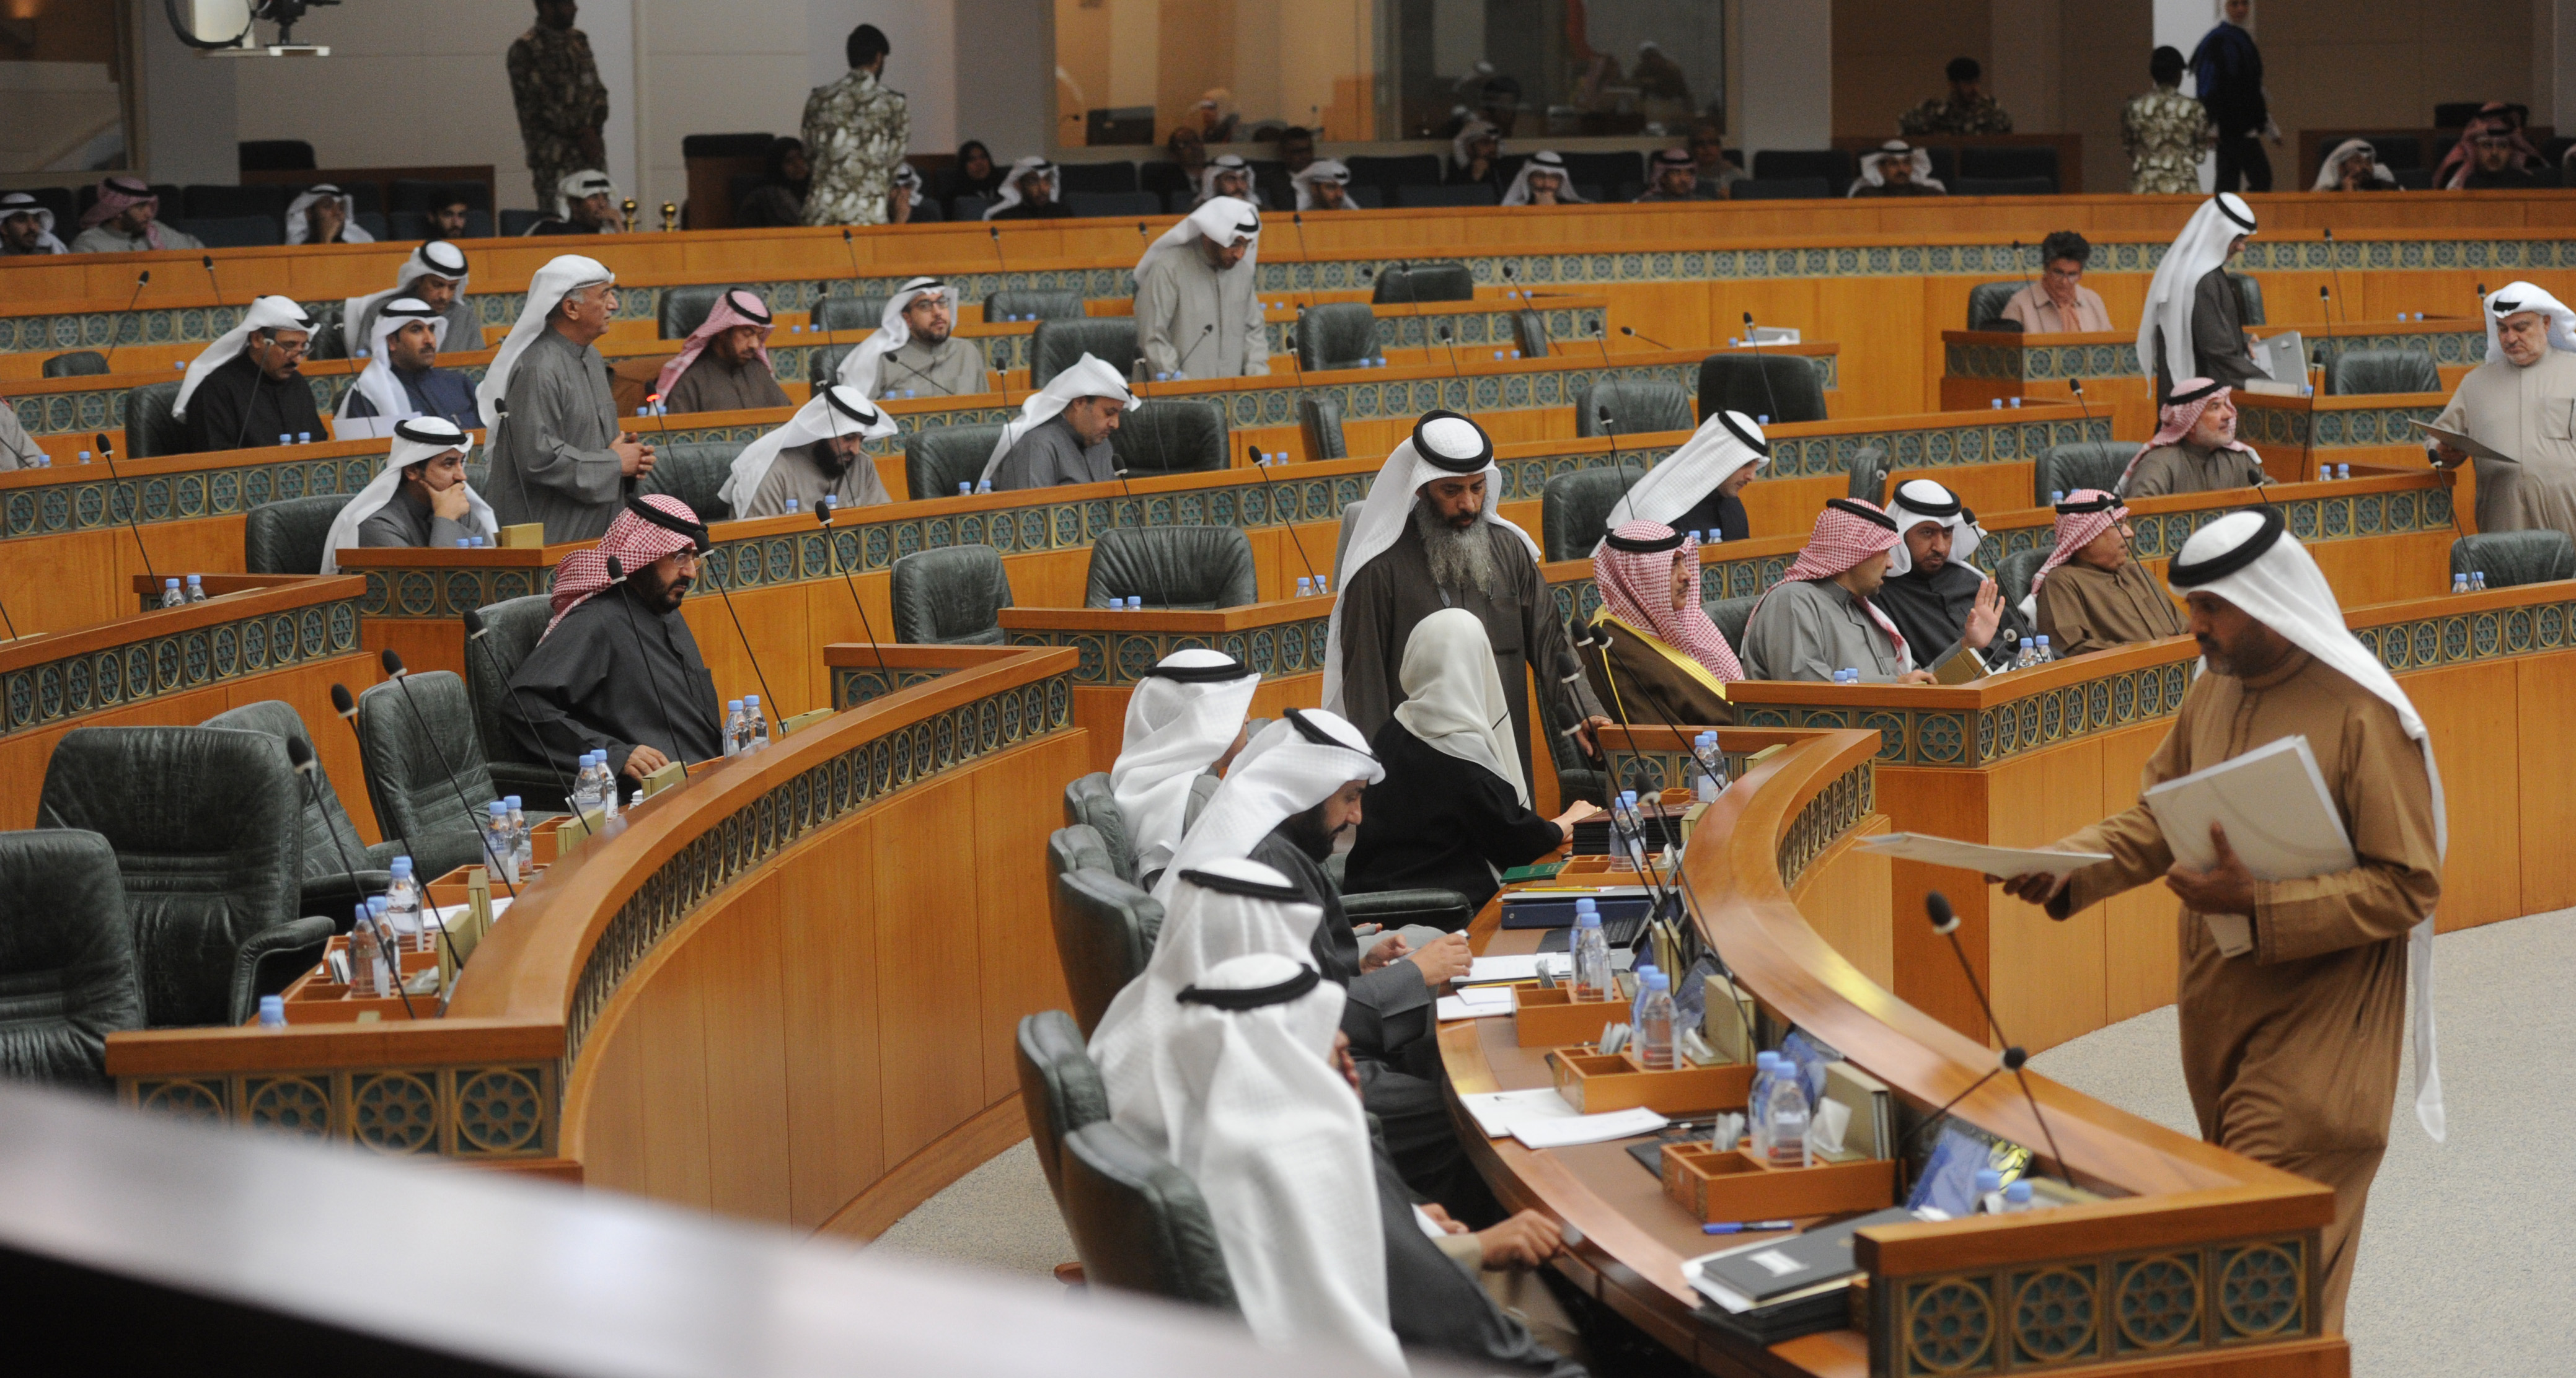 The MPs during session